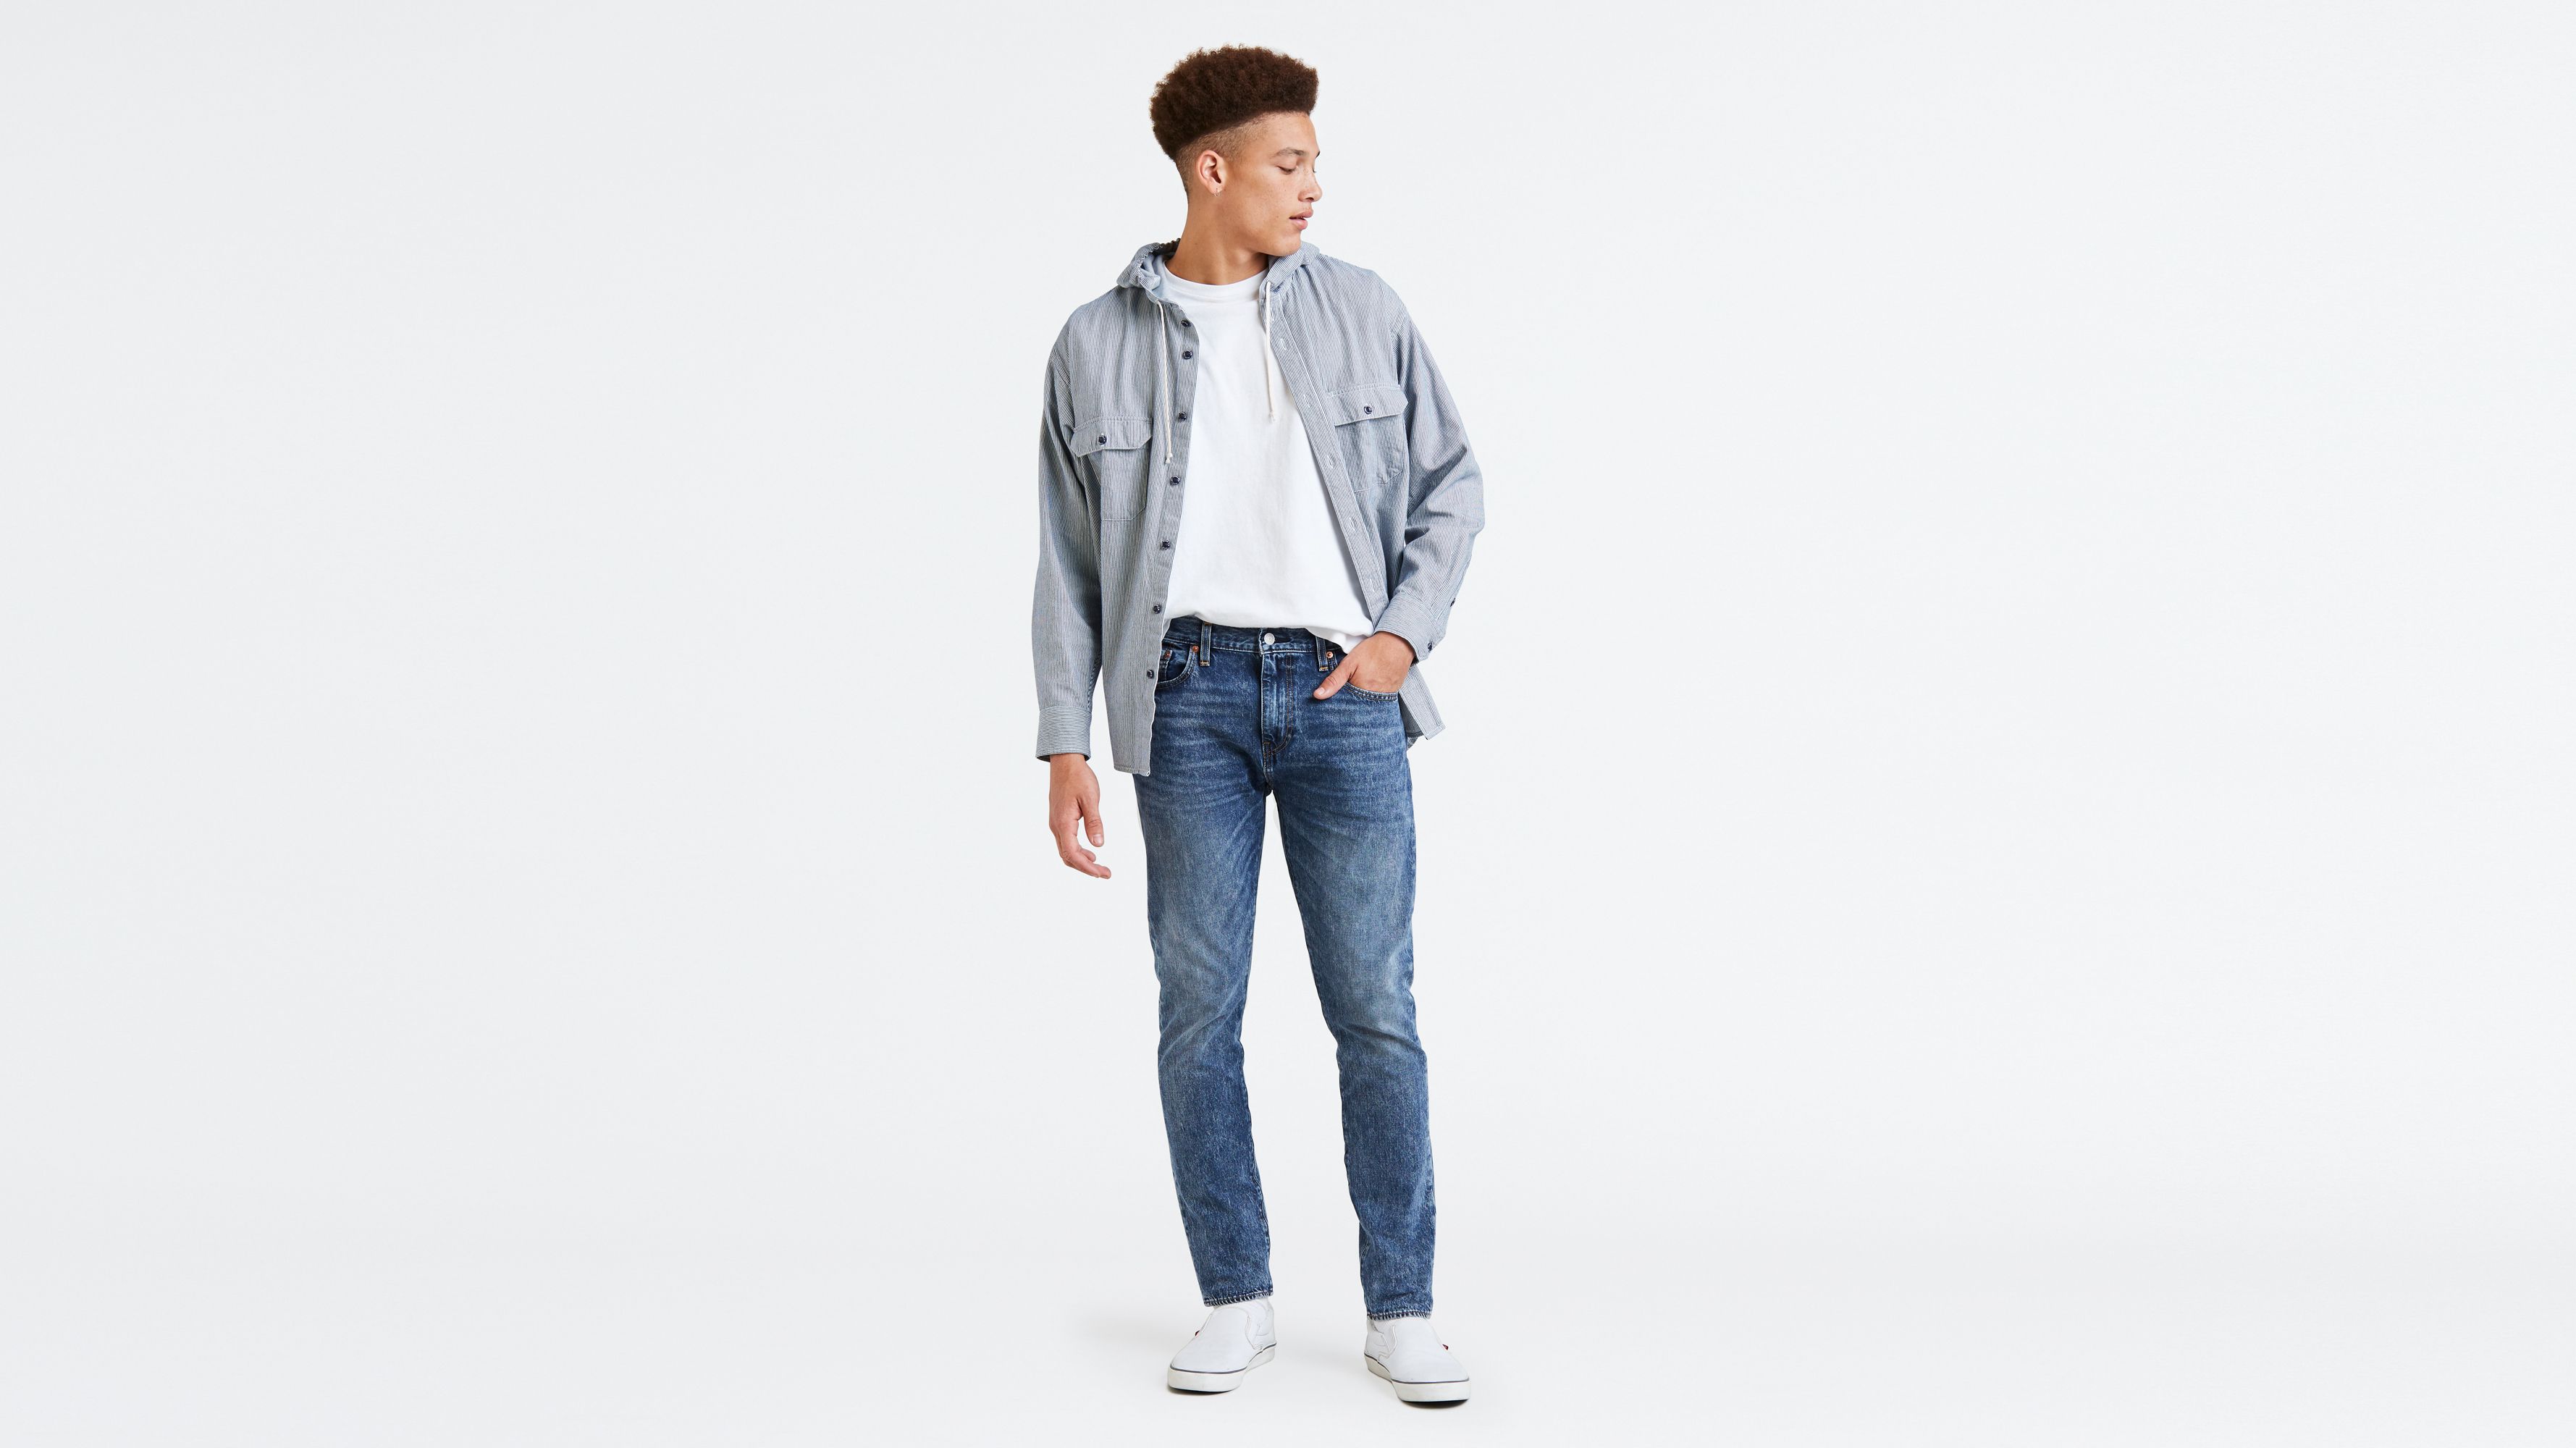 levis 501 mens tapered